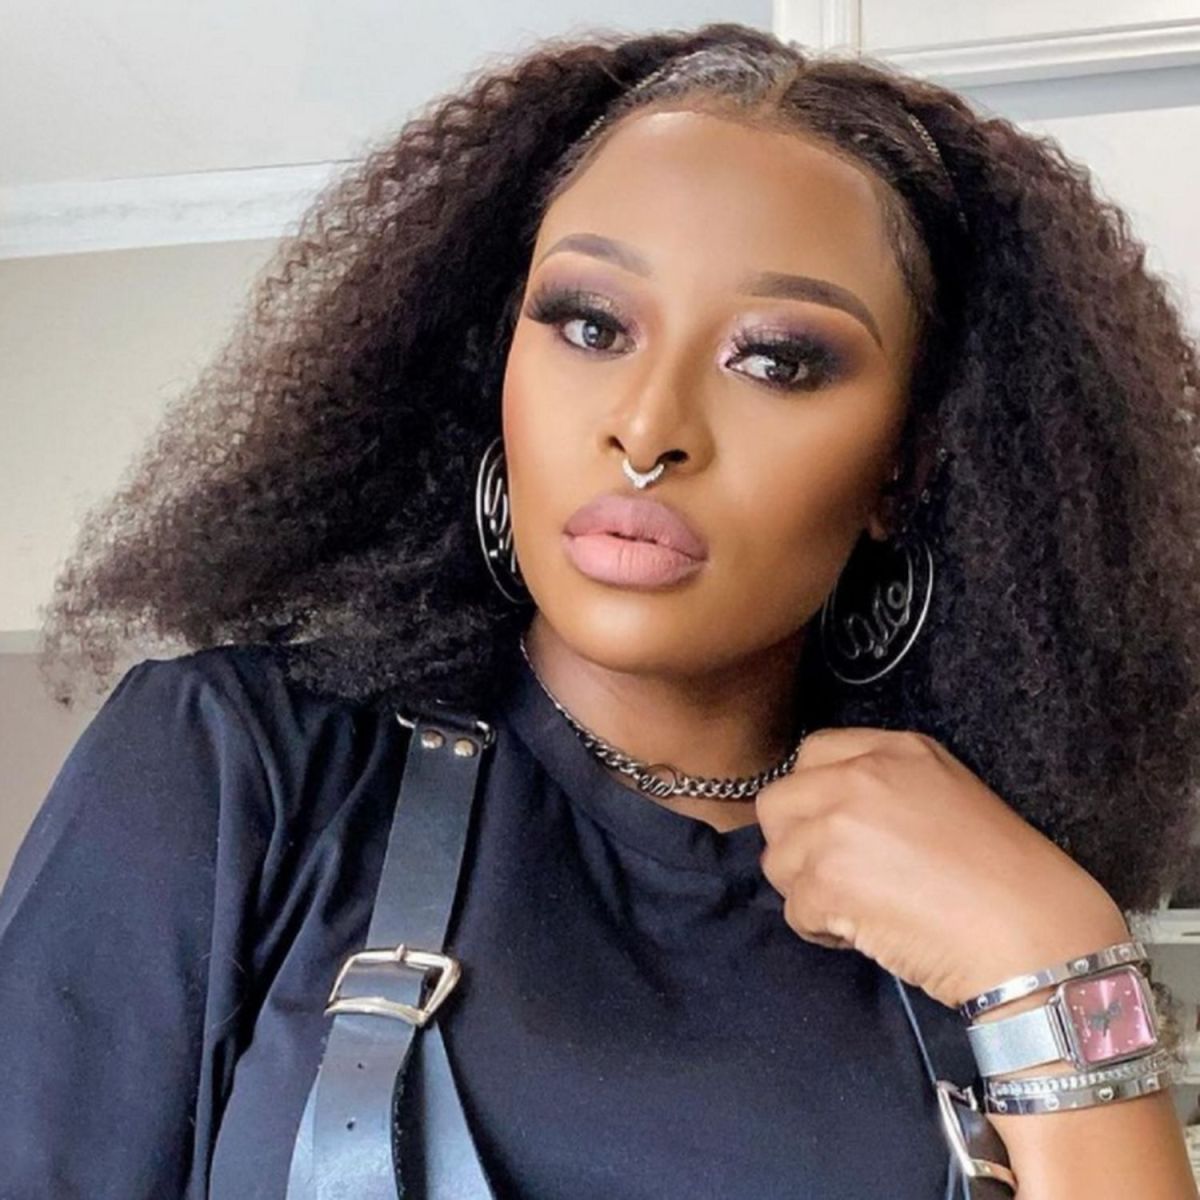 Dj Zinhle Wows Fans With Her Roller-Skating Skills (Watch) 1